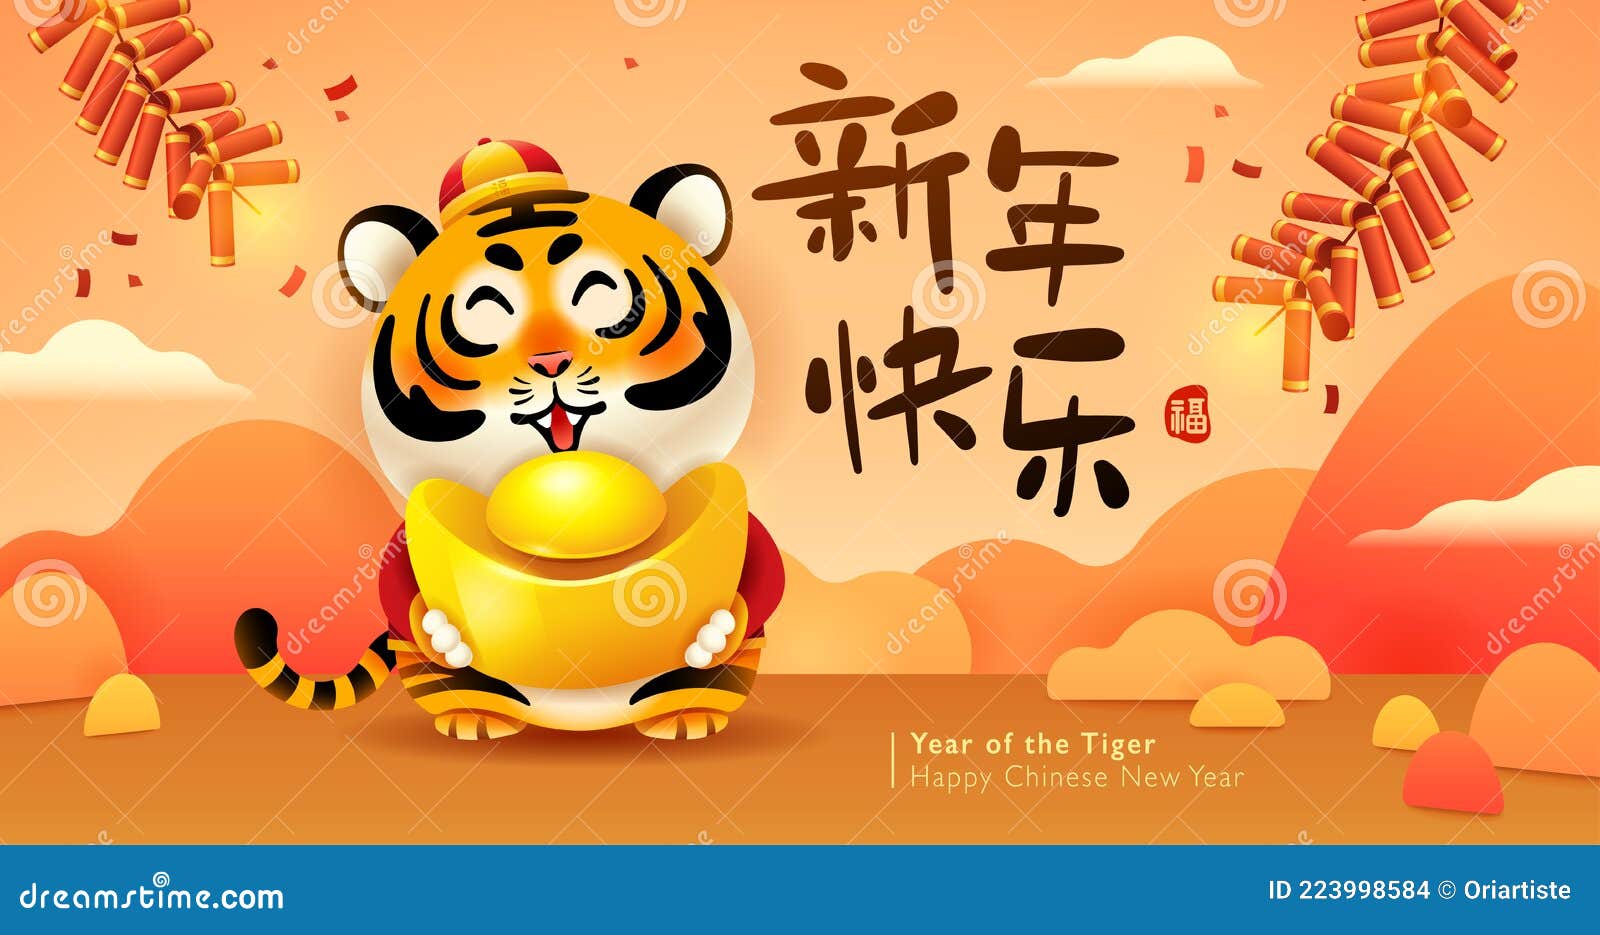 Cute Tiger on Oriental Festive Theme Background. Happy Chinese New Year  2022. Year of the Tiger Stock Vector - Illustration of 2022, design:  223998584